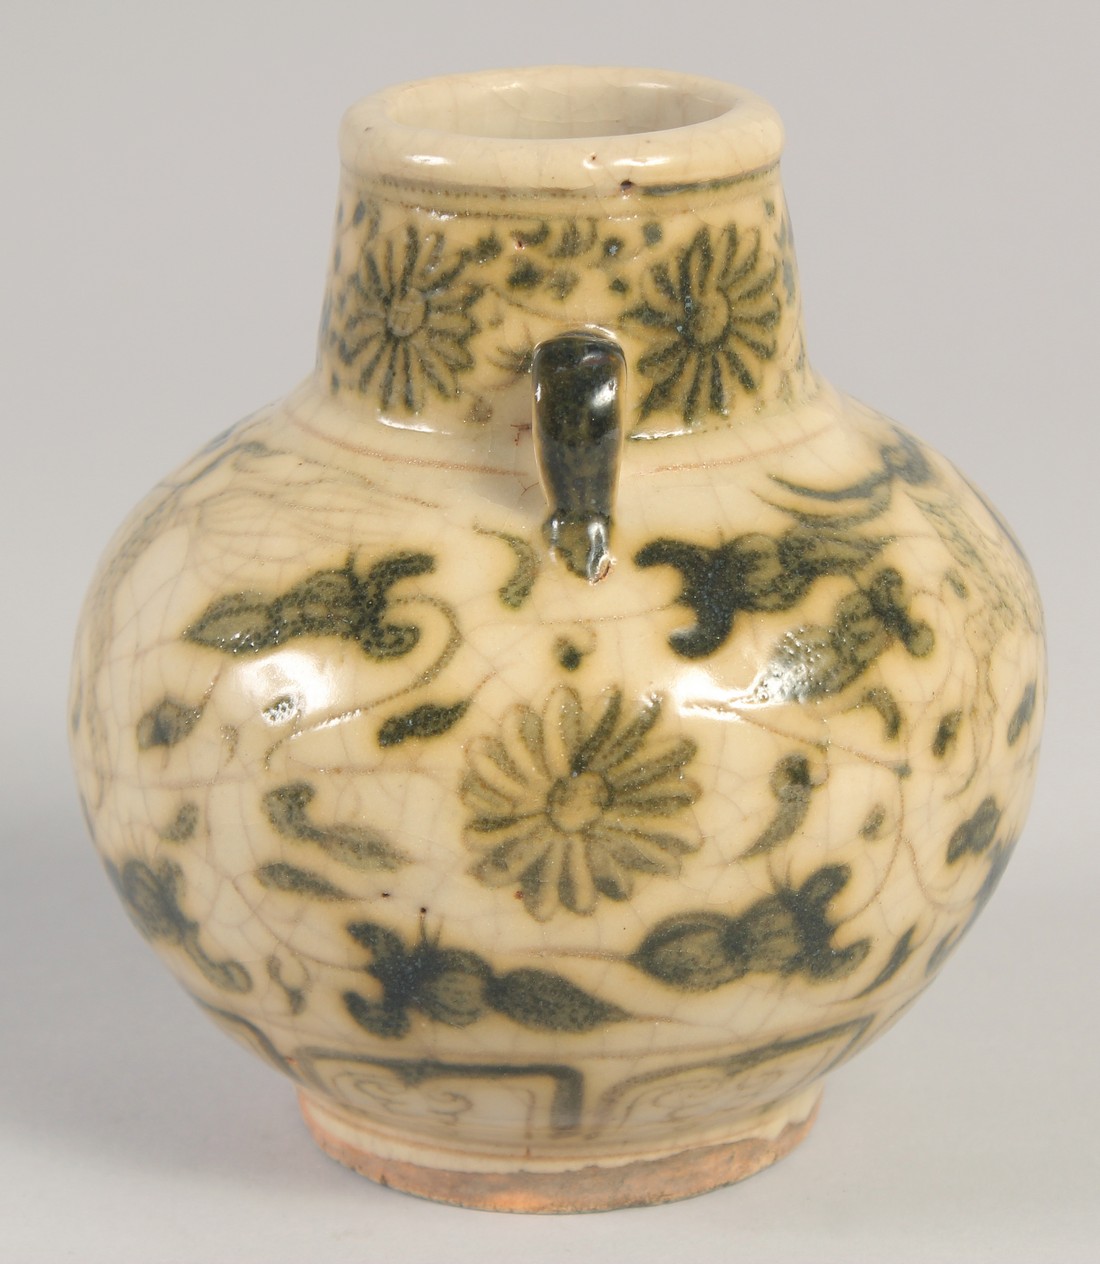 A THAI GLAZED POTTERY VASE, painted with beasts, 13.5cm high. - Image 6 of 6